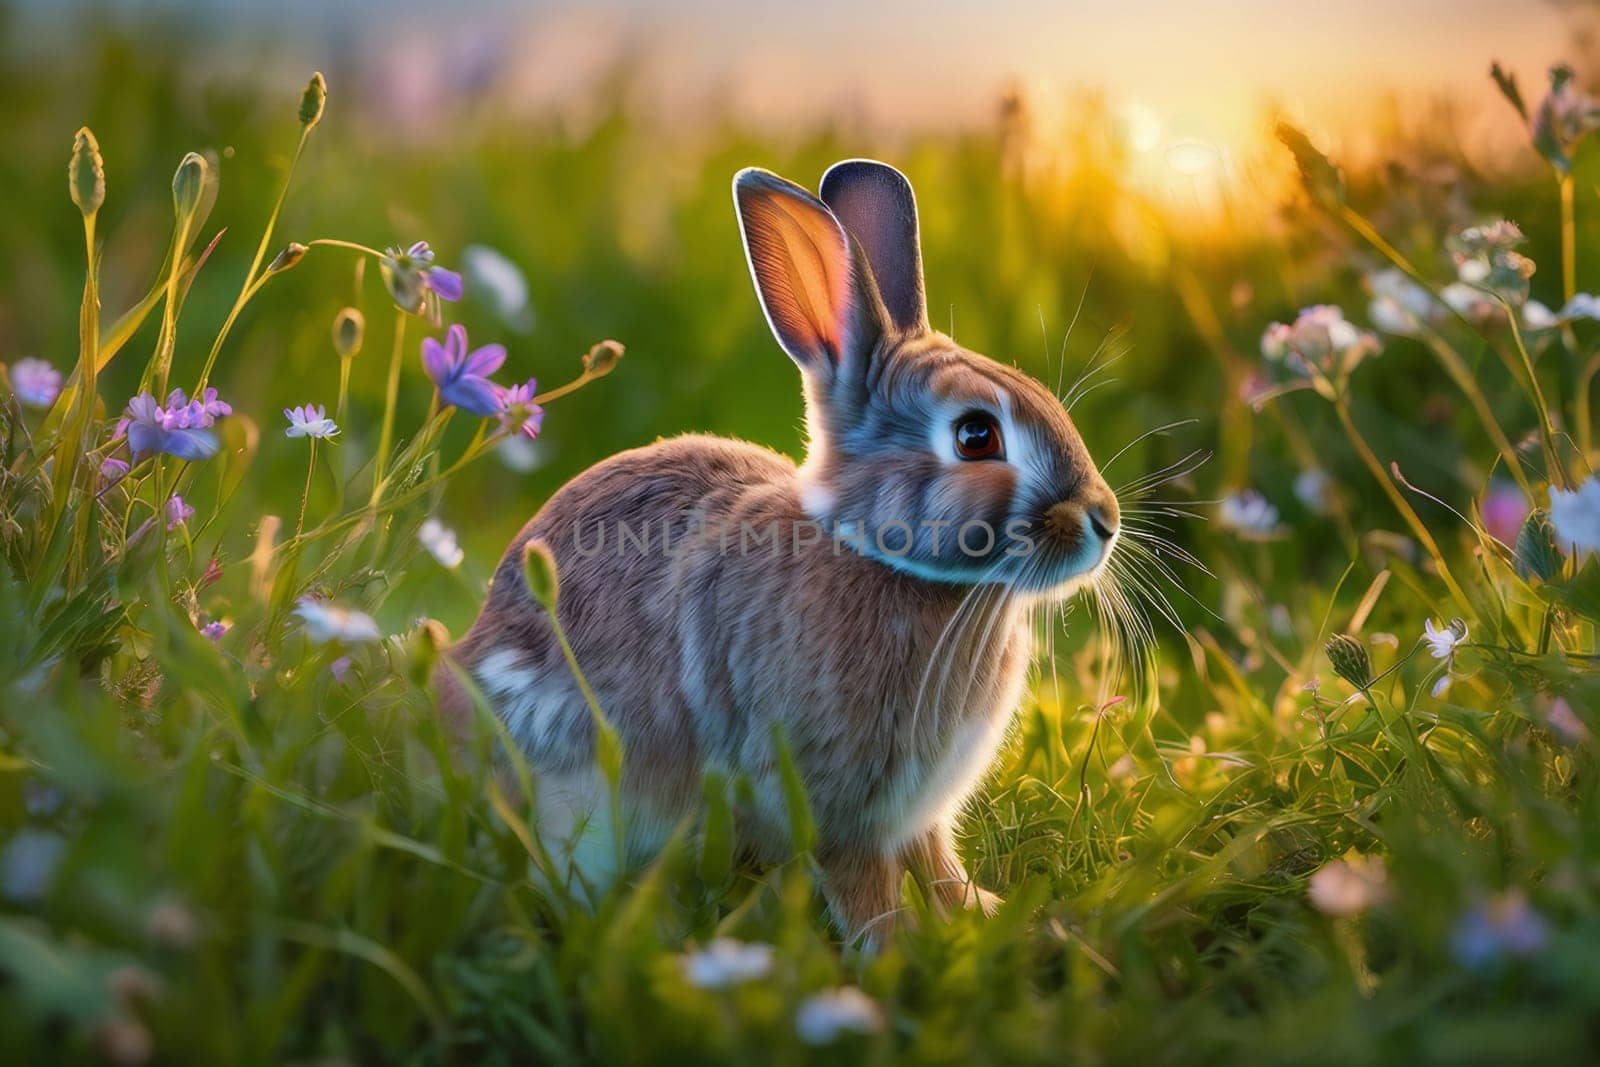 Rabbit on the lawn with flowers at sunset.